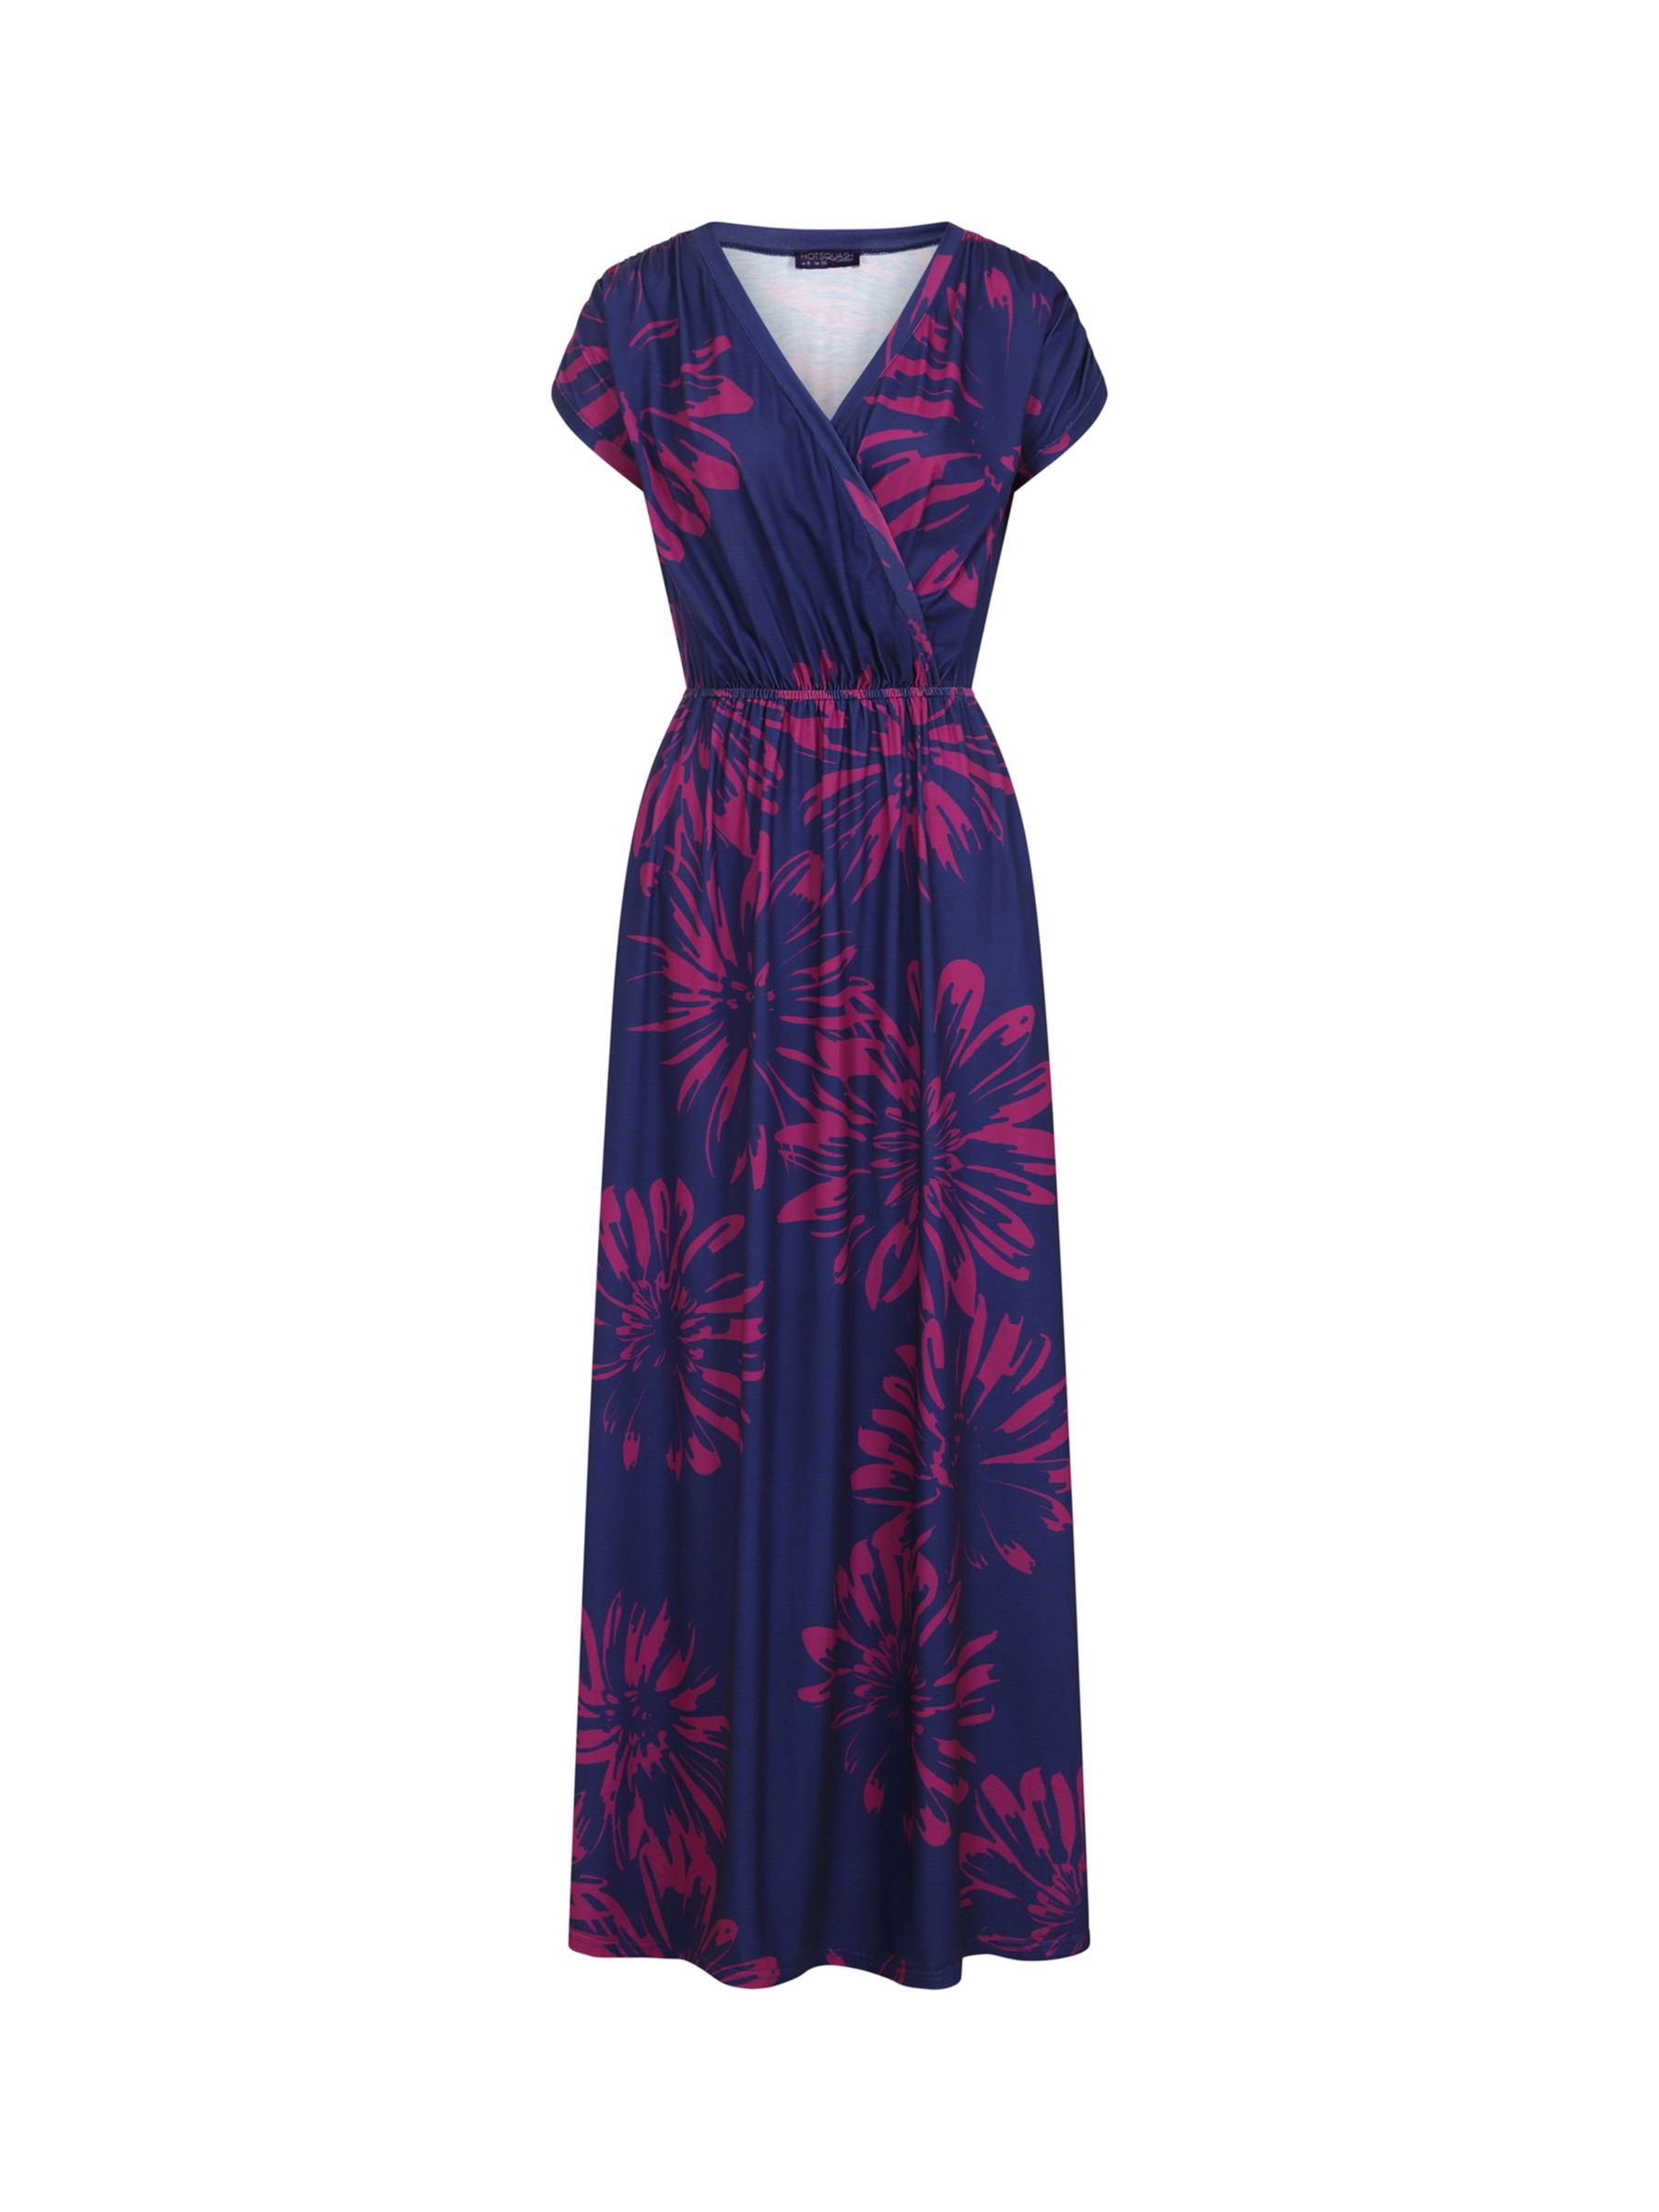 HotSquash Iconic Floral Maxi Dress, Navy/Pink, 8